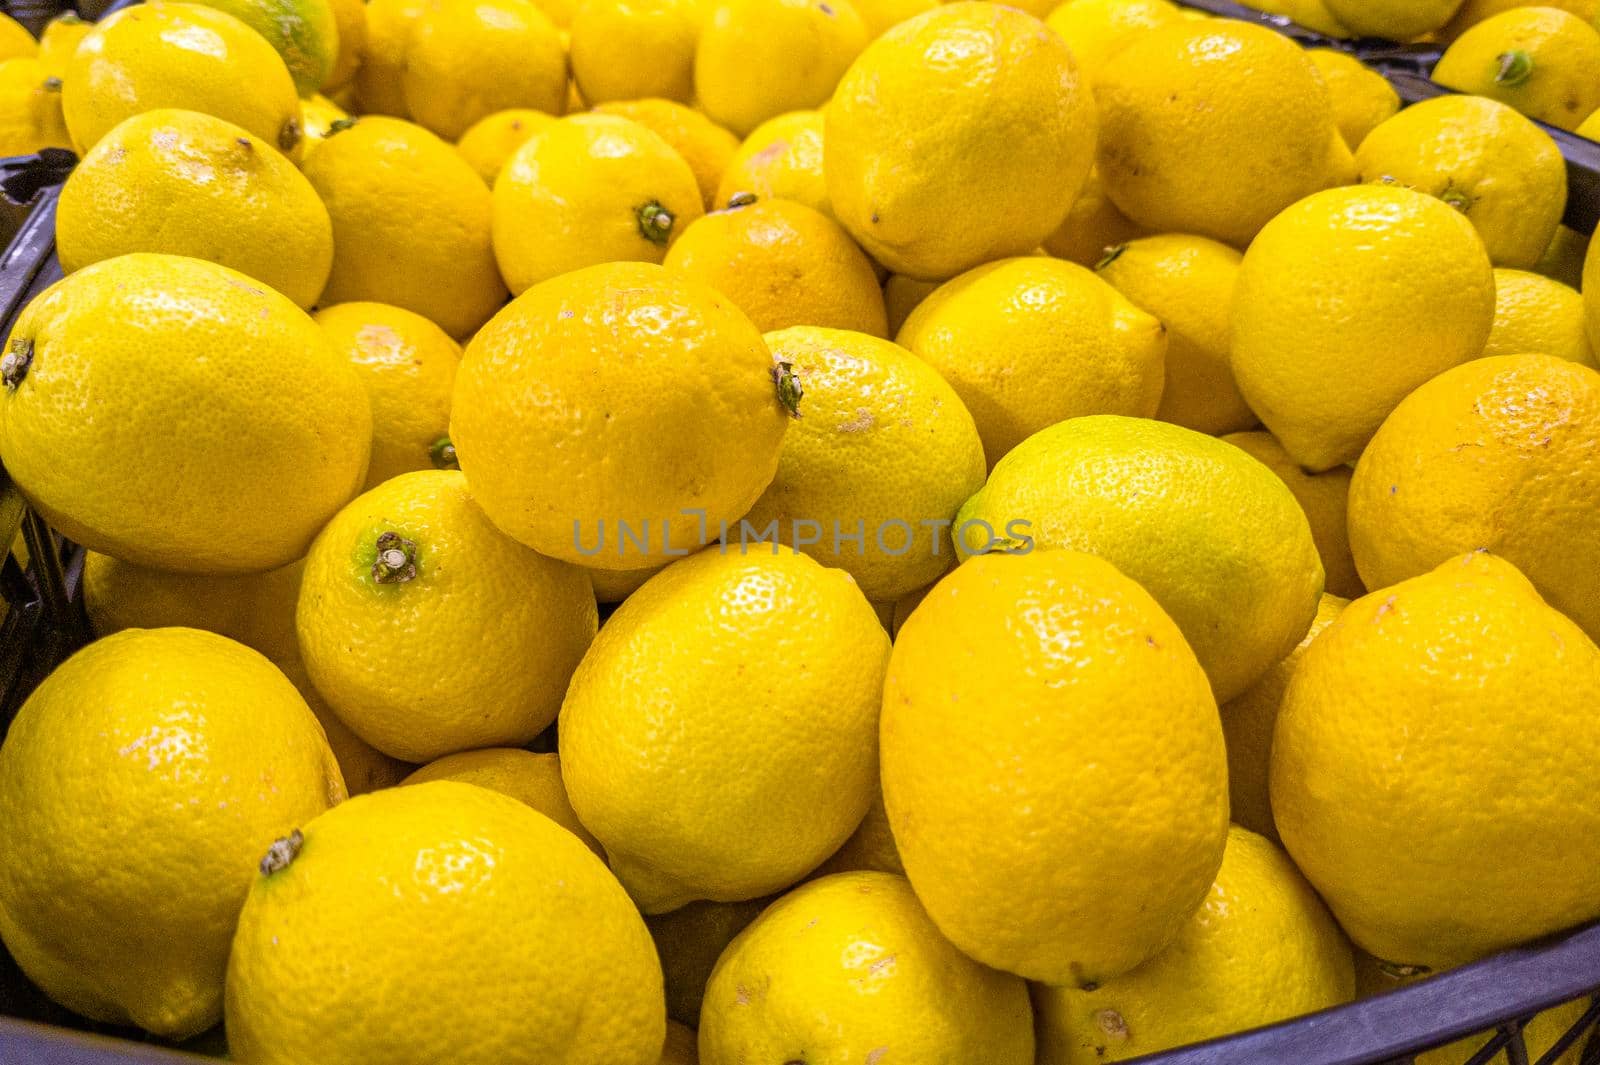 Fresh lemons are in a drawer in the store